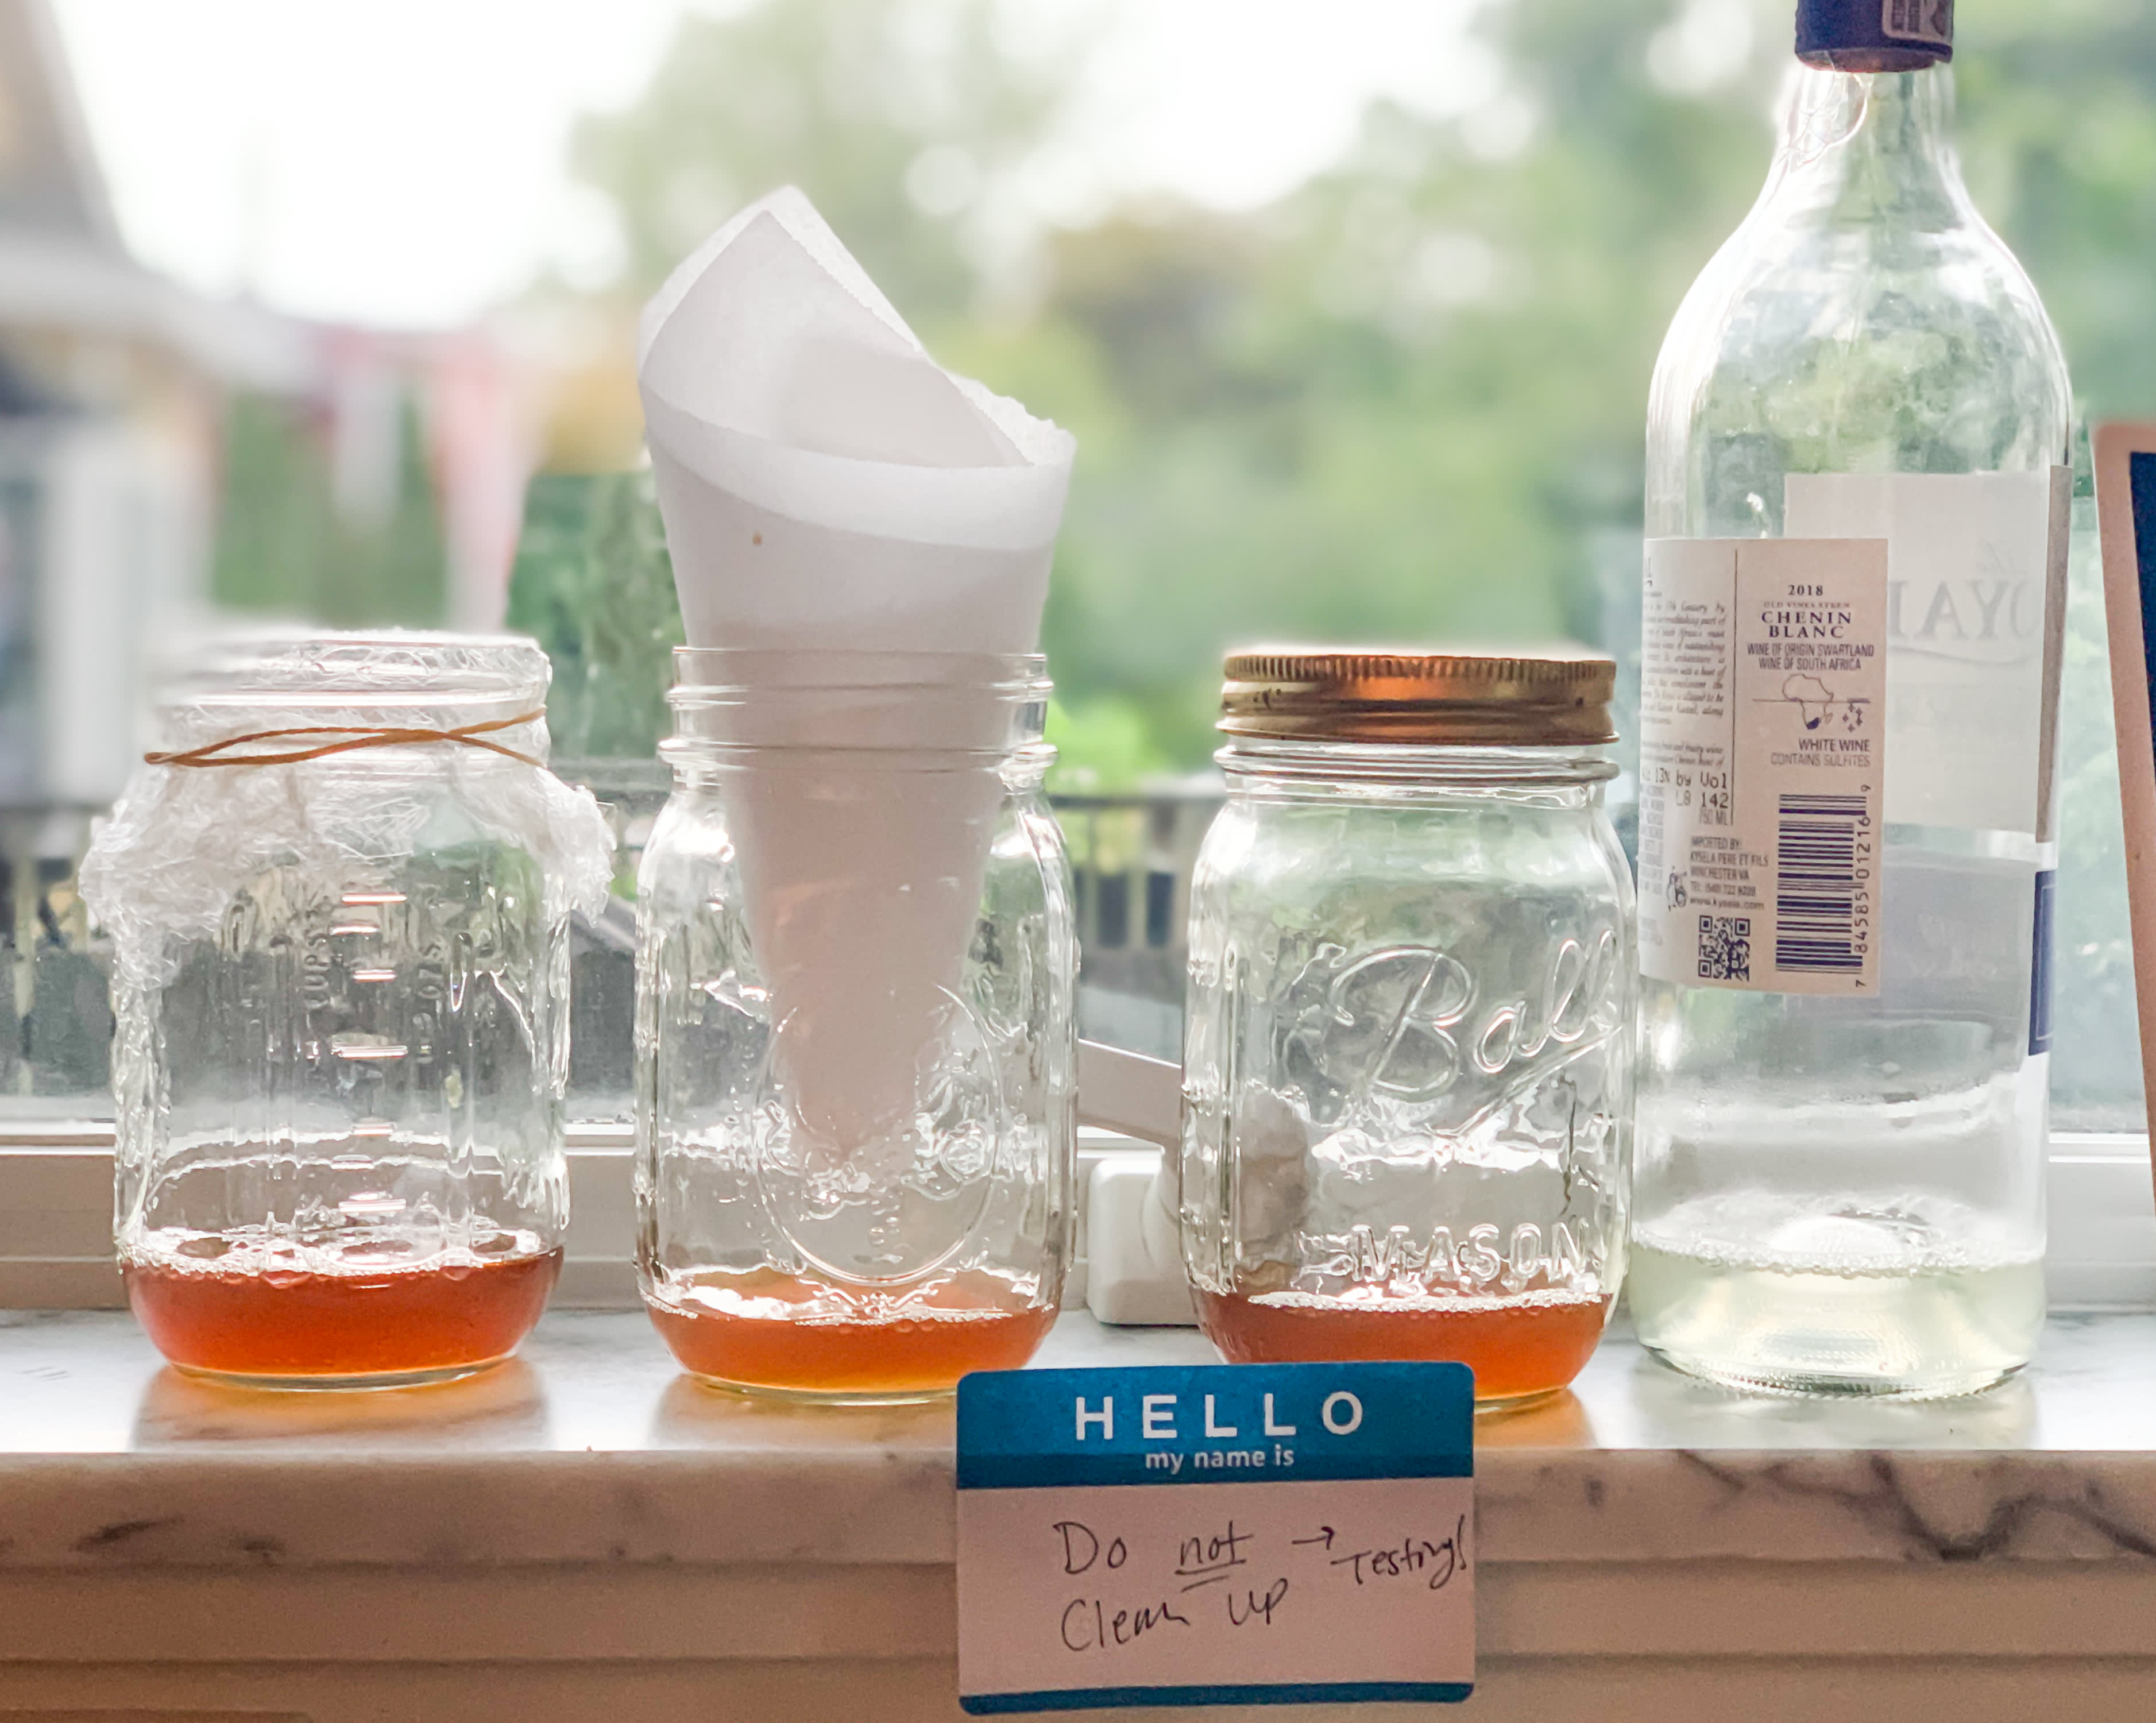 I Tested 4 Zero-Cost Methods for Trapping Fruit Flies in the Kitchen—and  Found One Clear Winner